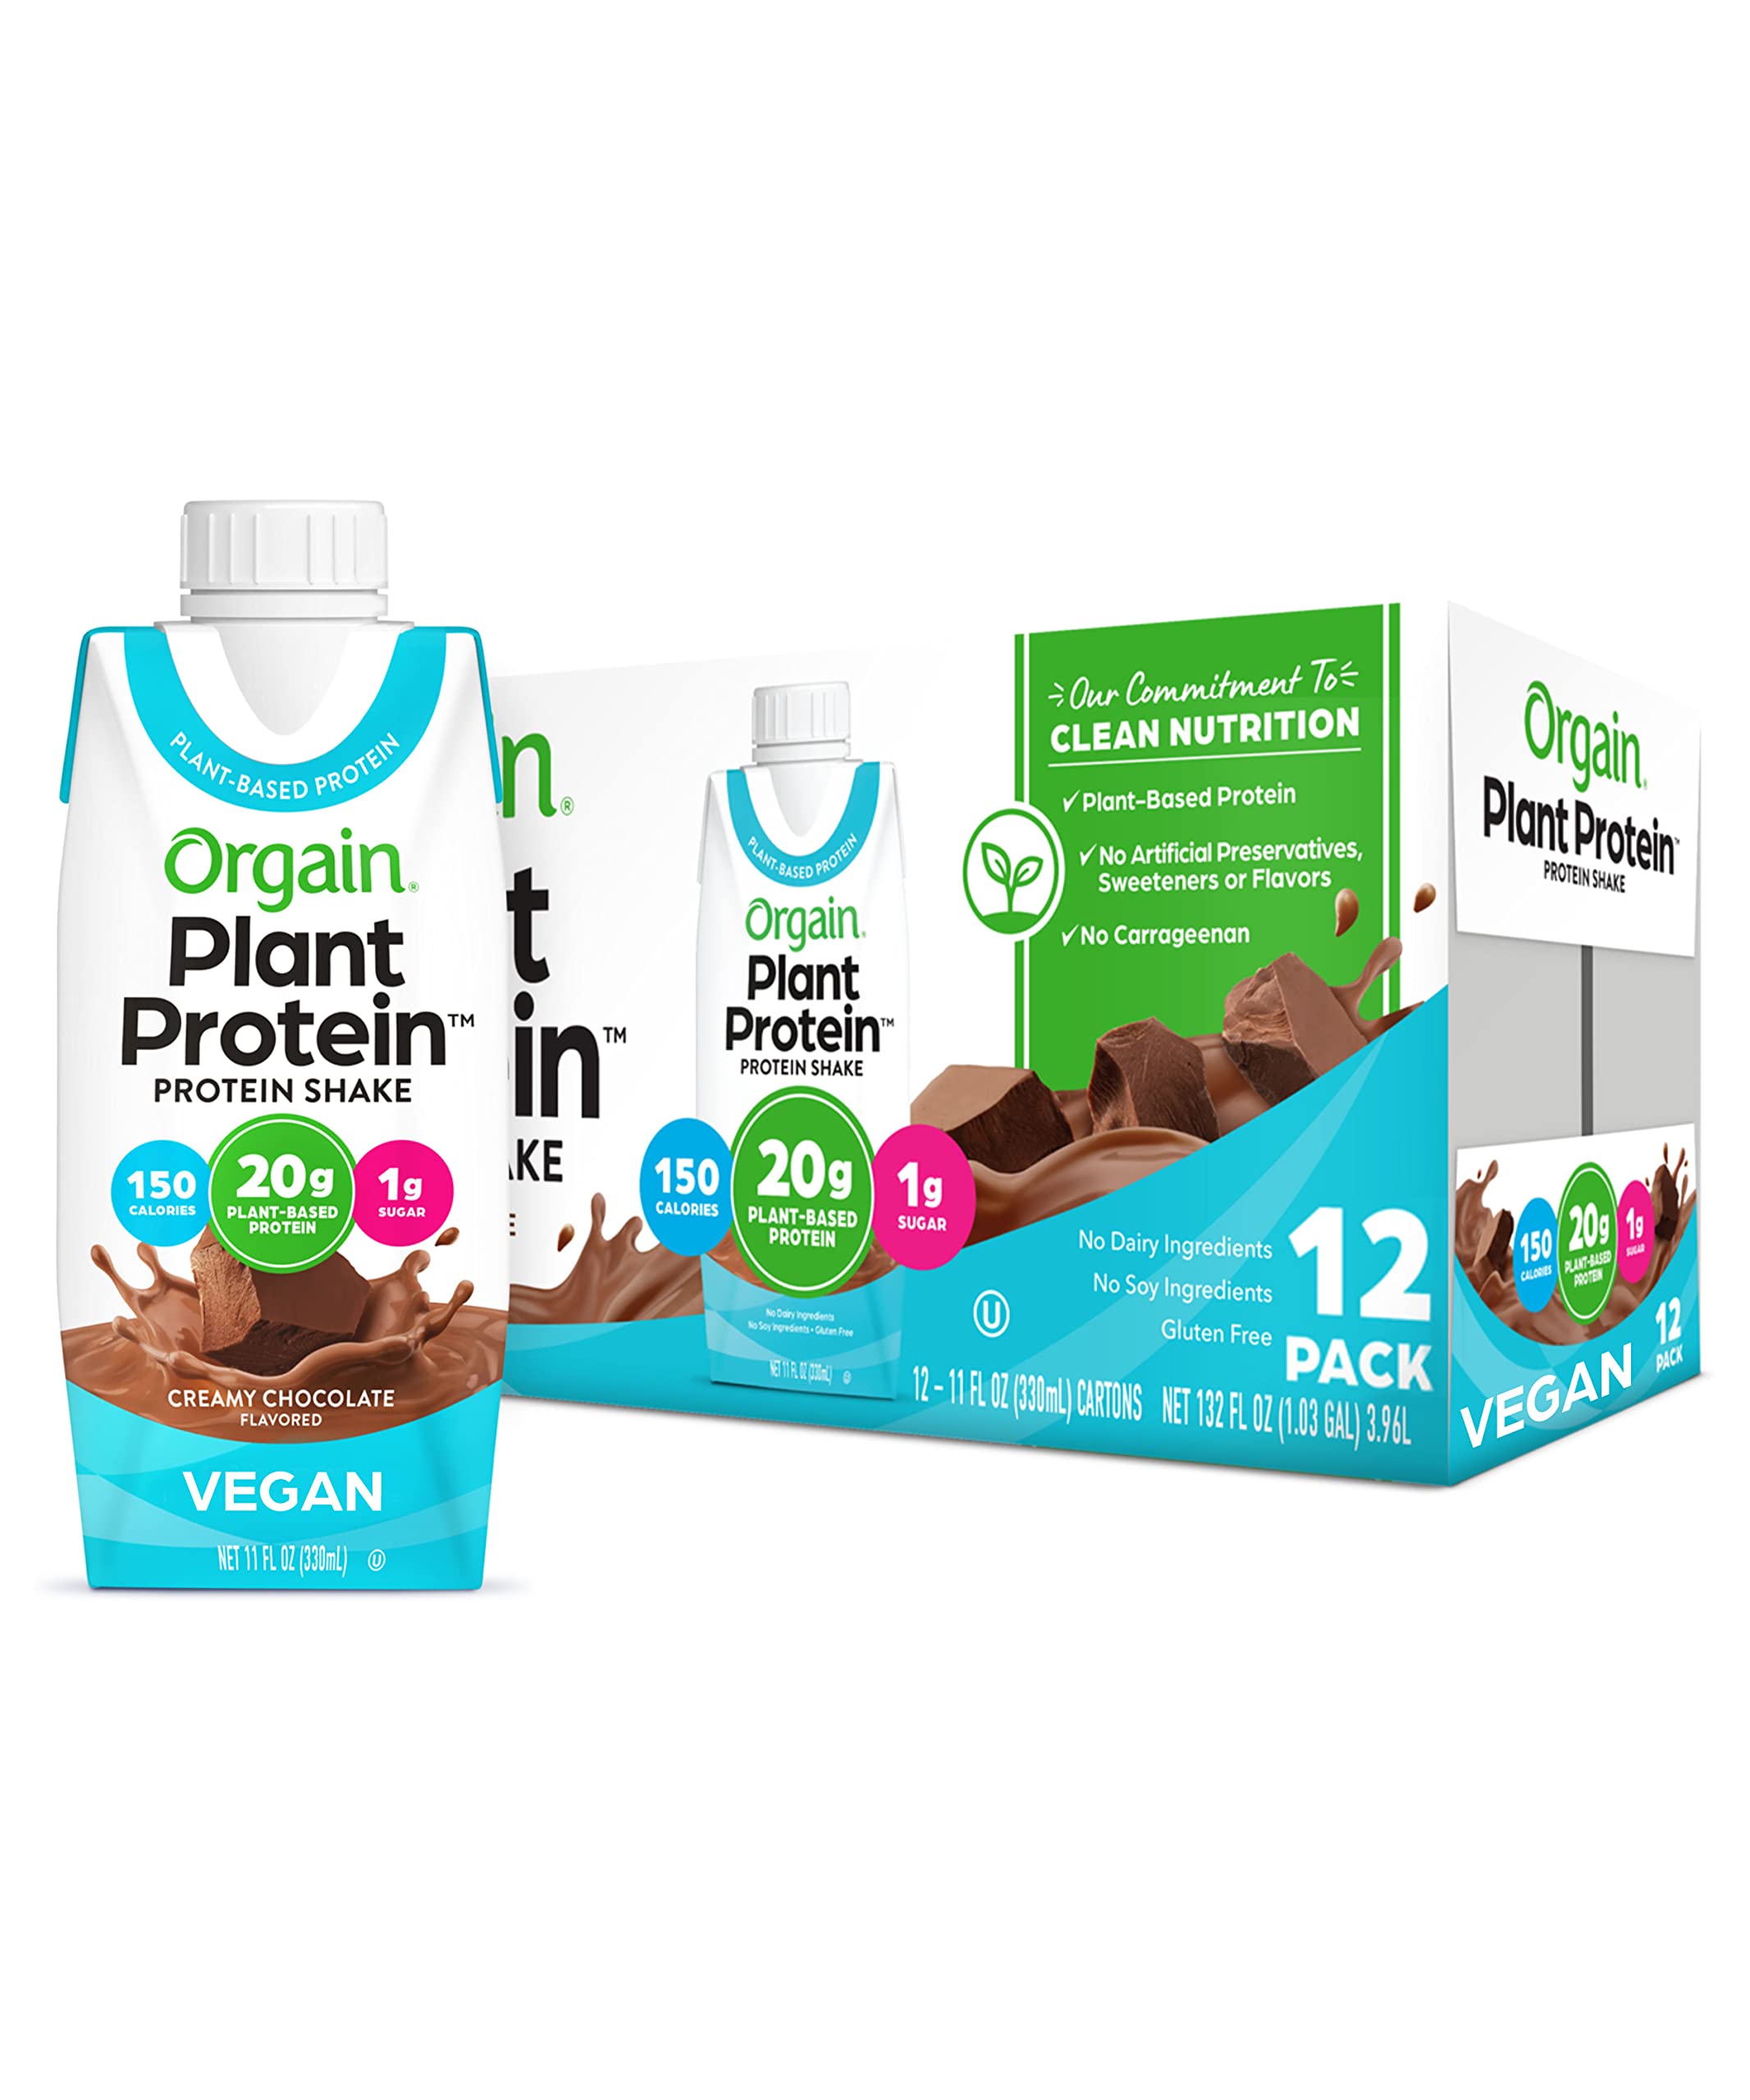 Orgain Vegan Protein Shakes, 20g of Plant Based Protein, Creamy Chocolate - Gluten Free, No Dairy, Soy, or Preservatives, No Added Sugar, 11 Fl Oz,...